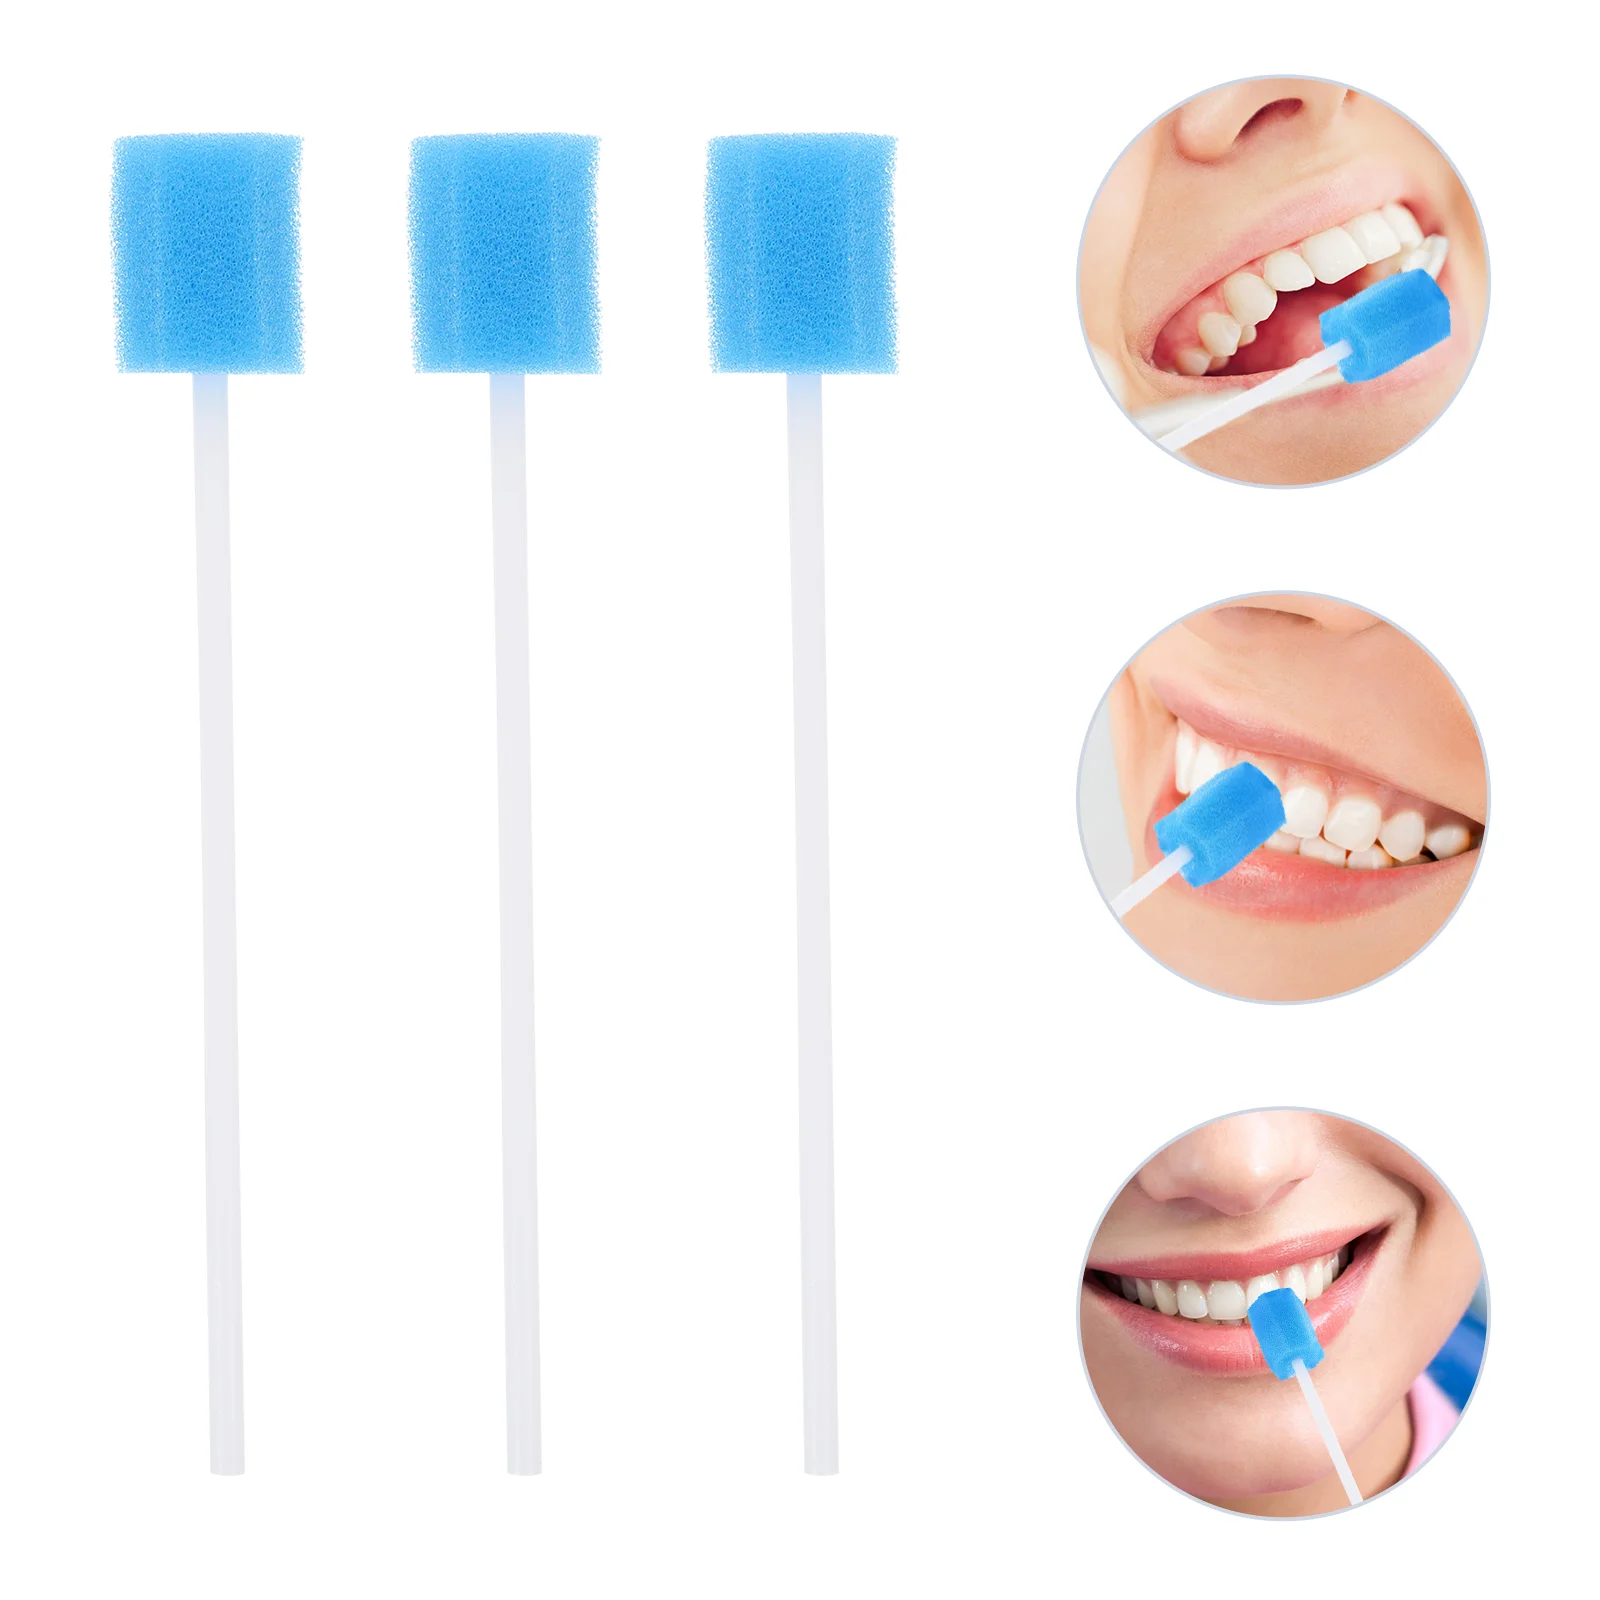 

Swabs Oral Mouth Sponge Care Cleaning Disposable Swab Stick Sponges Swabsticks Unflavored Tooth Cavity Sterile Foam A Wrapped